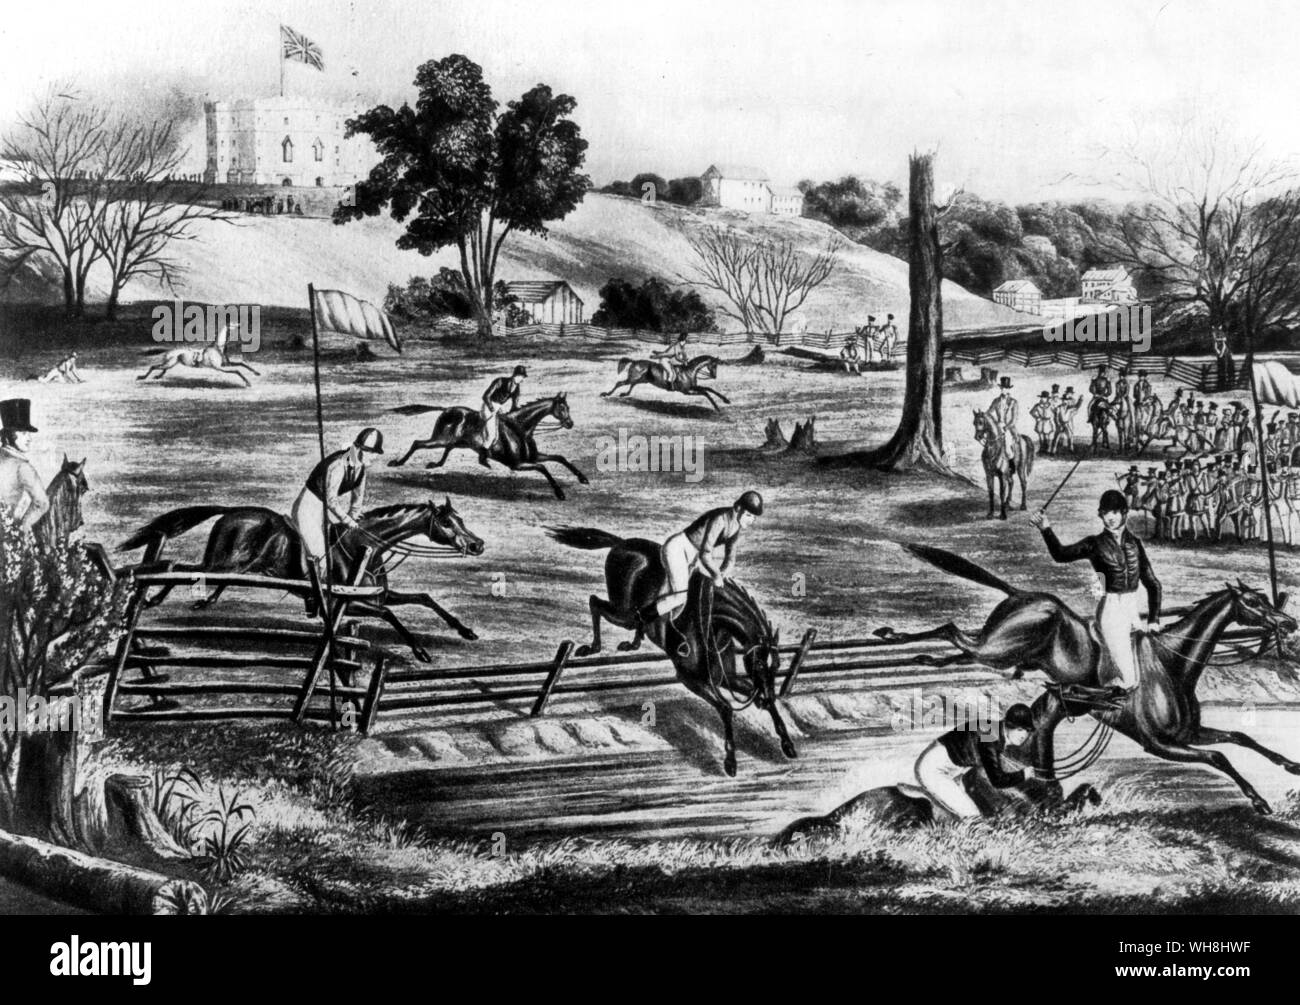 Ontario steeplechasing - on 9th May 1843, the army in 'Canada West' put on a grand Military Steeplechase at London, 100 miles west of Toronto. This was only the second year of racing in Ontario, which in the next 15 years became more successful than that of Quebec because of an English rather than a French population. Canadian steeplechasing, beginning thus early and vigorously, was the principal parent of American. The History of Horse Racing by Roger Longrigg, page 220. Stock Photo